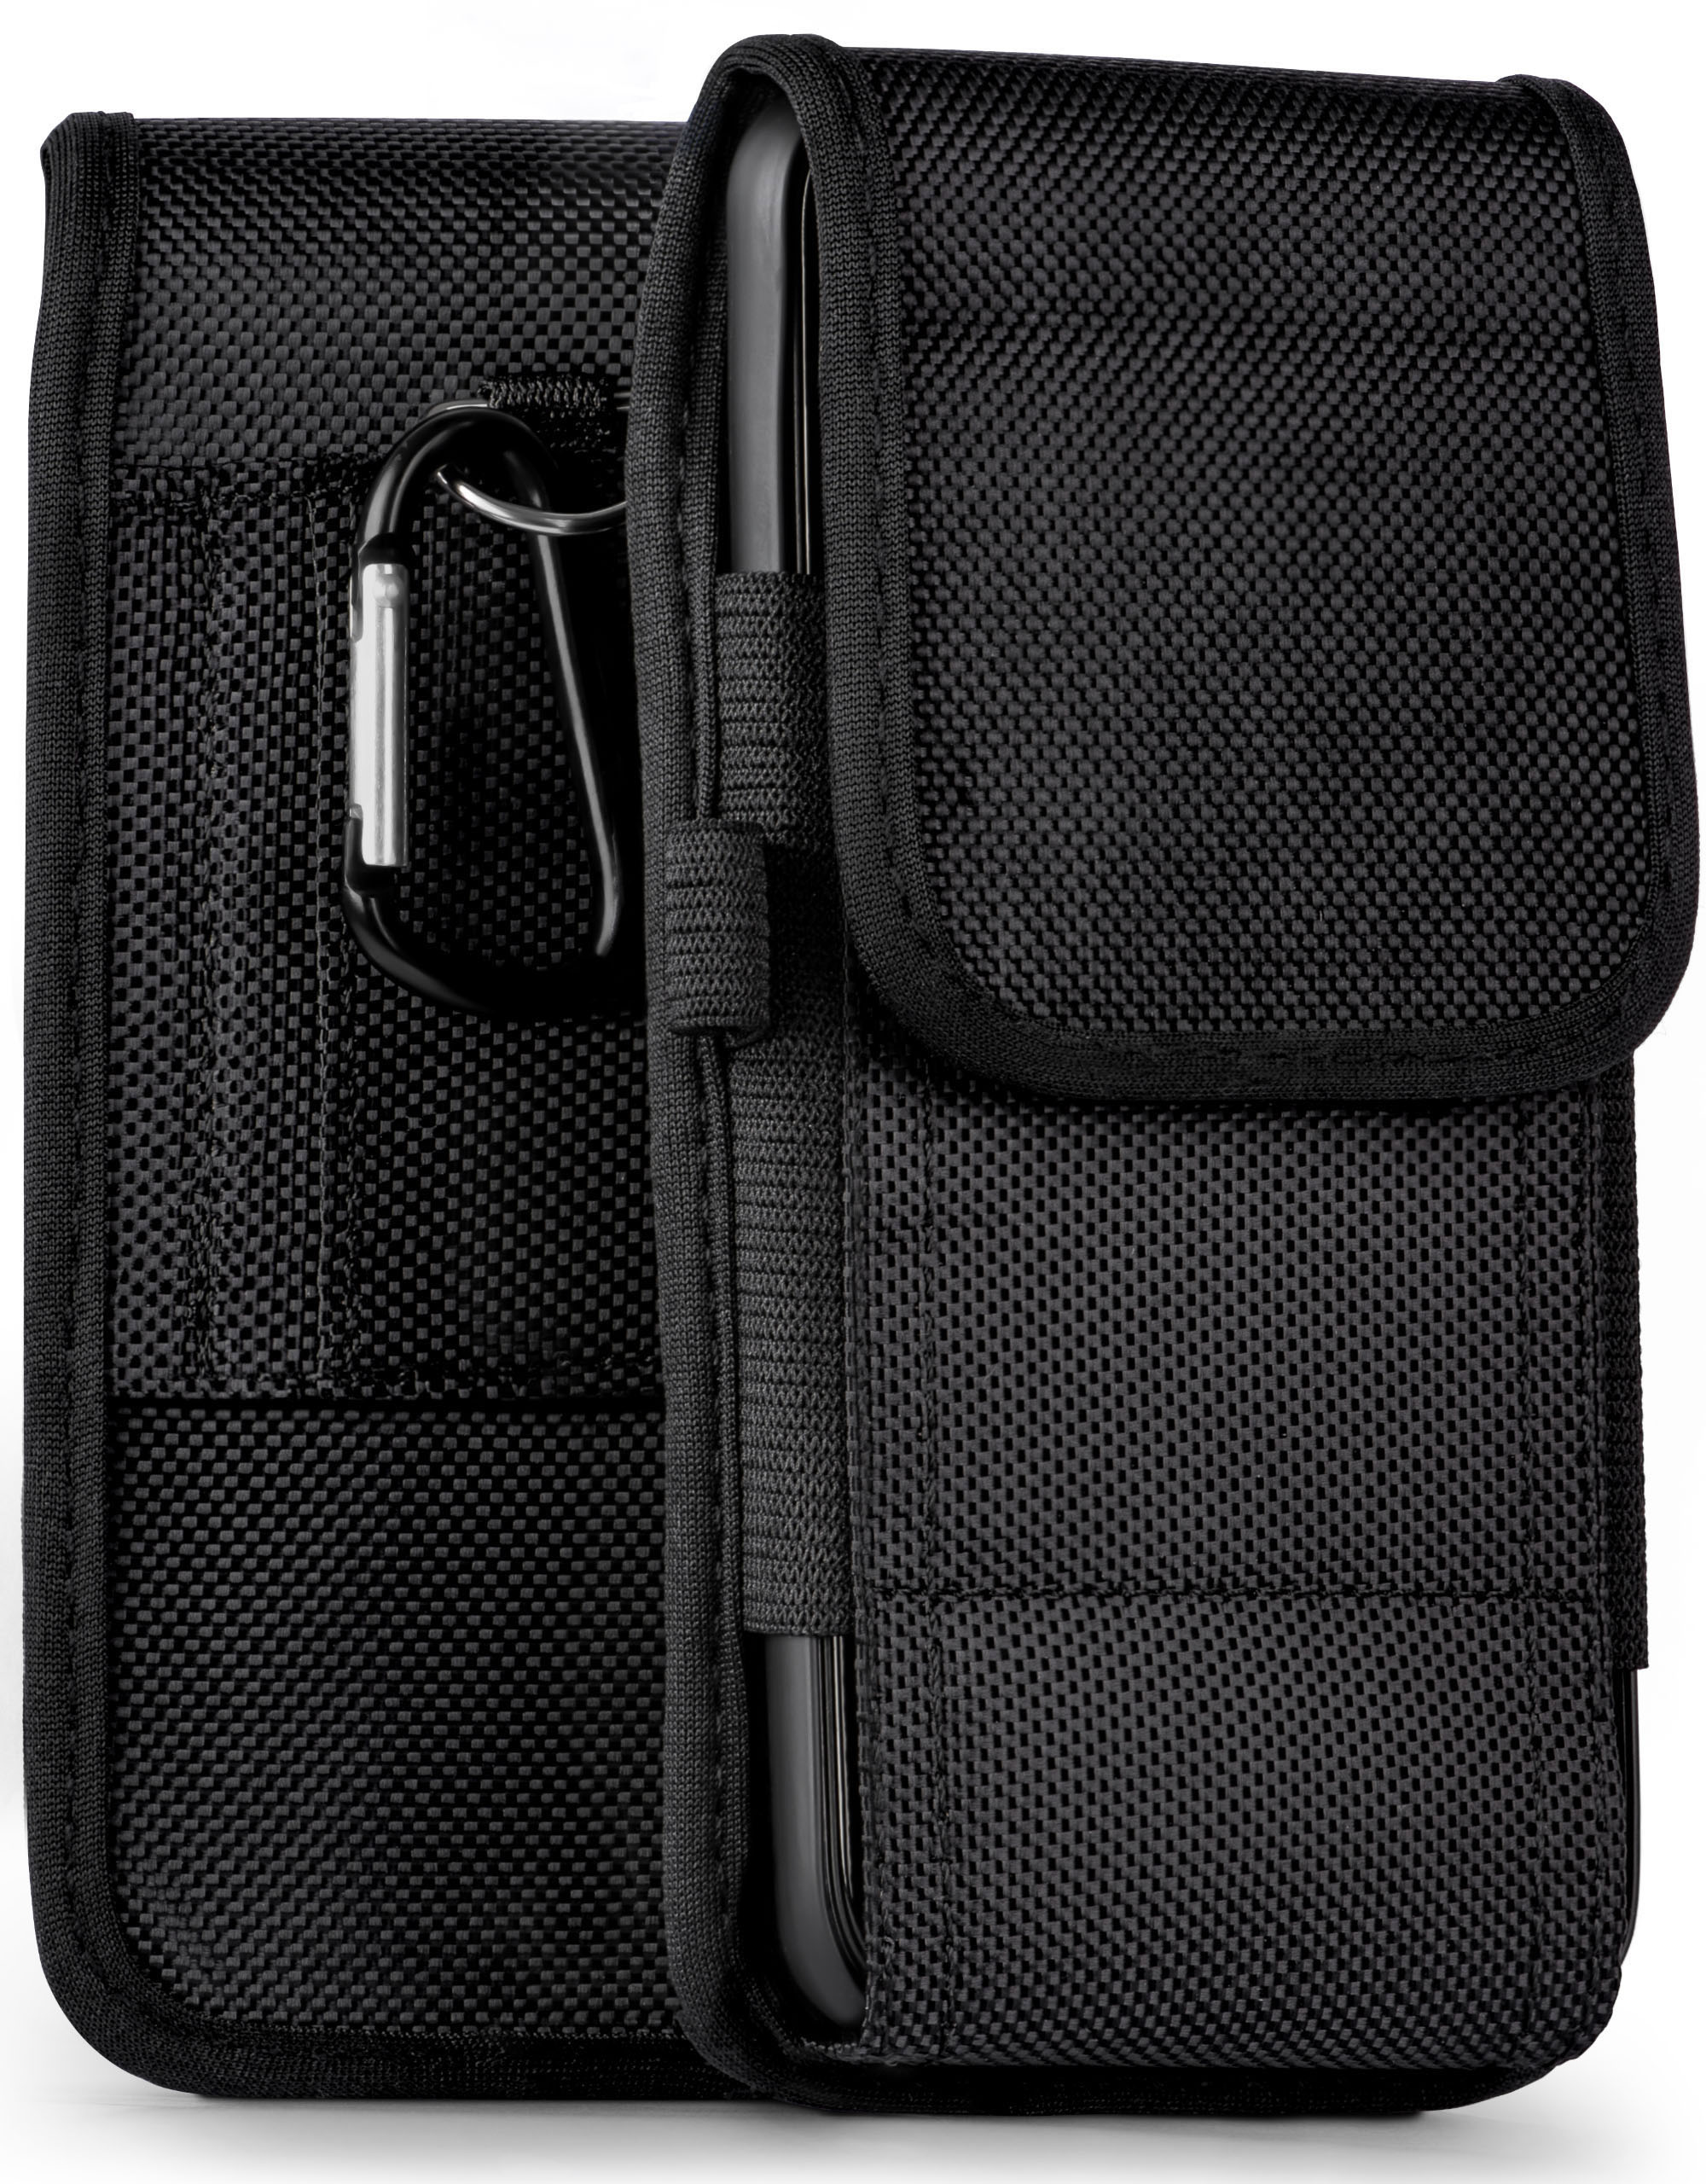 MOEX Agility Case, Holster, C9 Trail Neffos TP-Link, Max